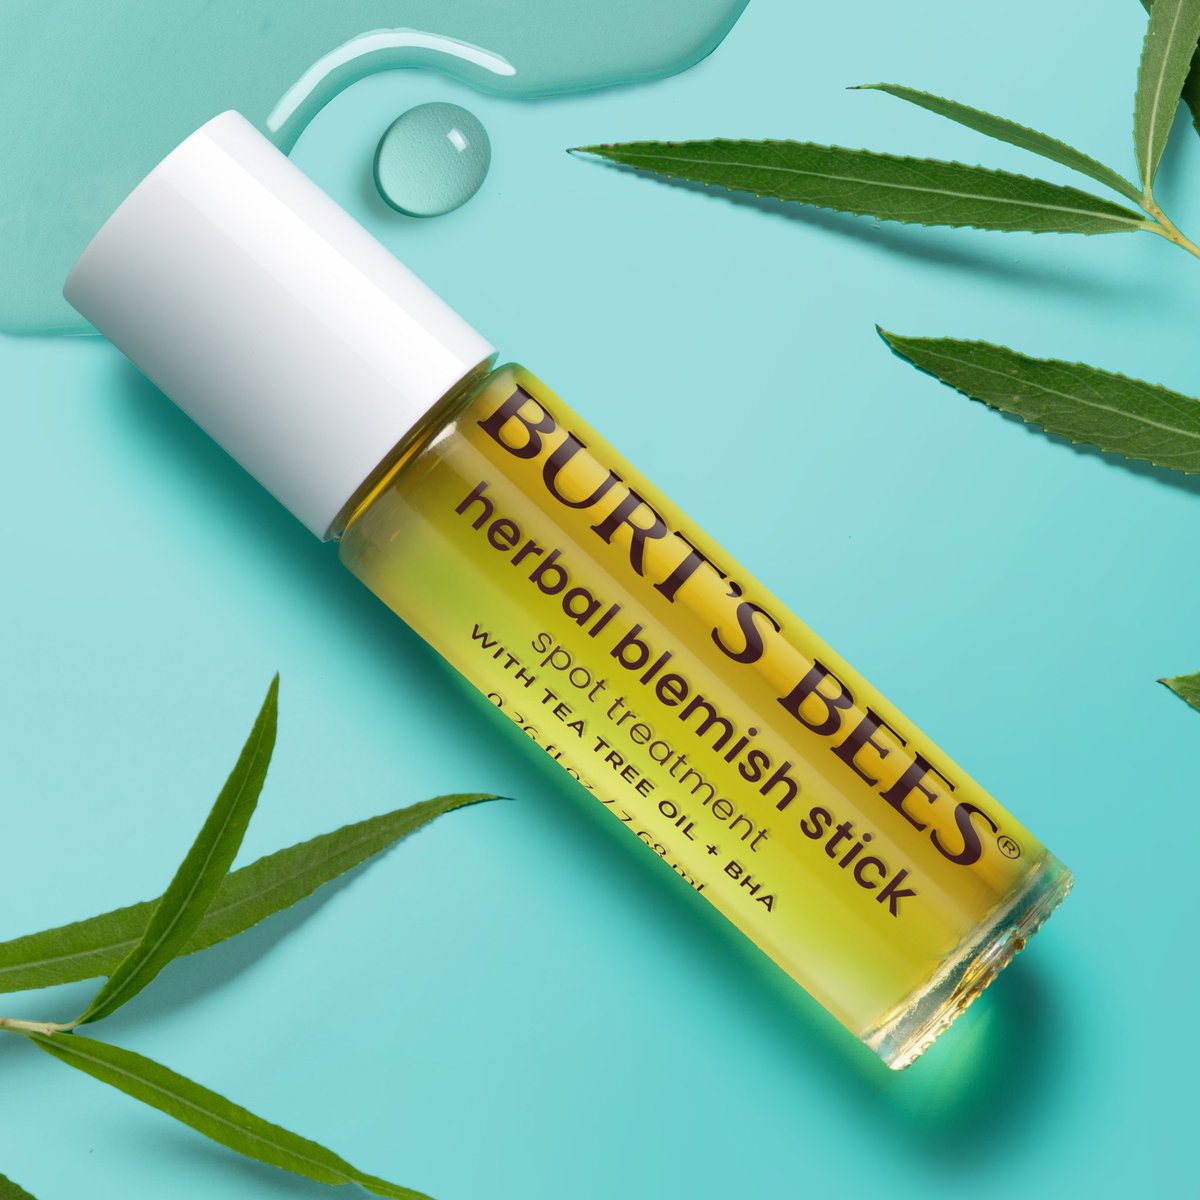 Poppin' off about our Herbal Blemish Stick. It treats on-the-go & has antibacterial properties so you can avoid popping and picking when a blemish pops up.

#acnesolutions #acnetreatment #herbalblemishstick #skincare #burtsbees